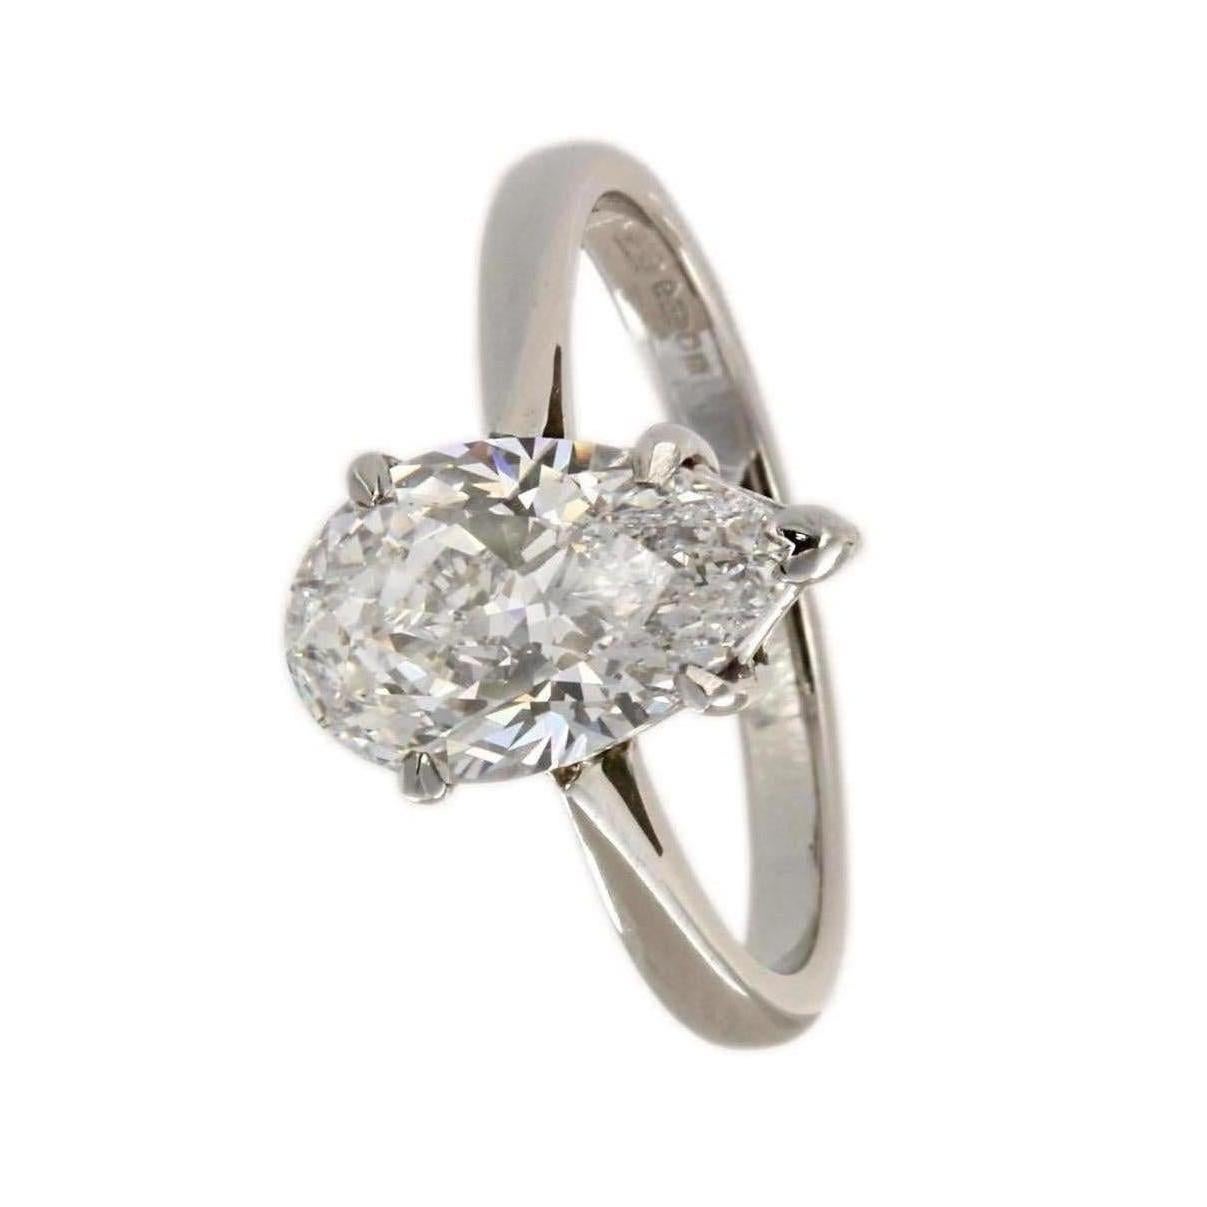 Modern Certified 2.00 Carat Pear-Shaped Solitaire Diamond Ring